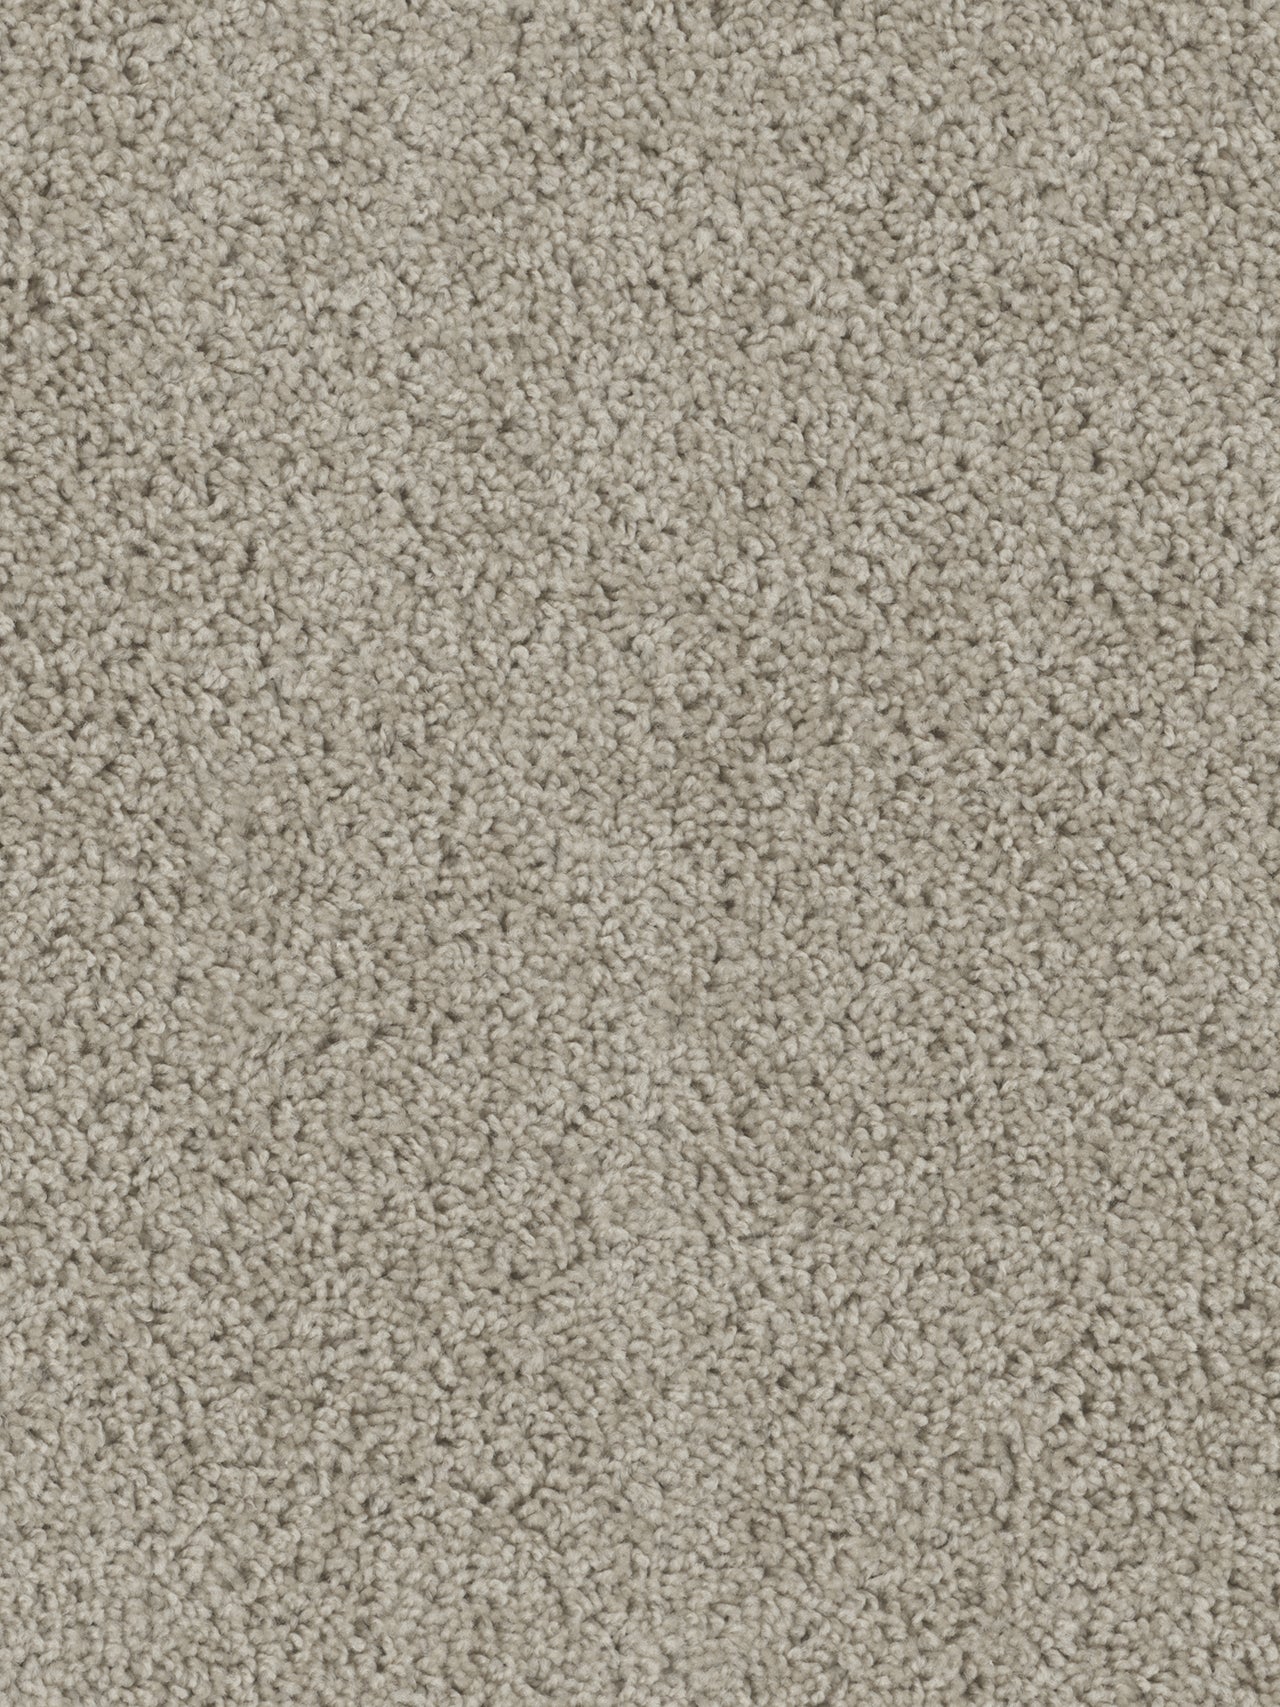 MZ 225 - Flax - Carpet - Sold by yd